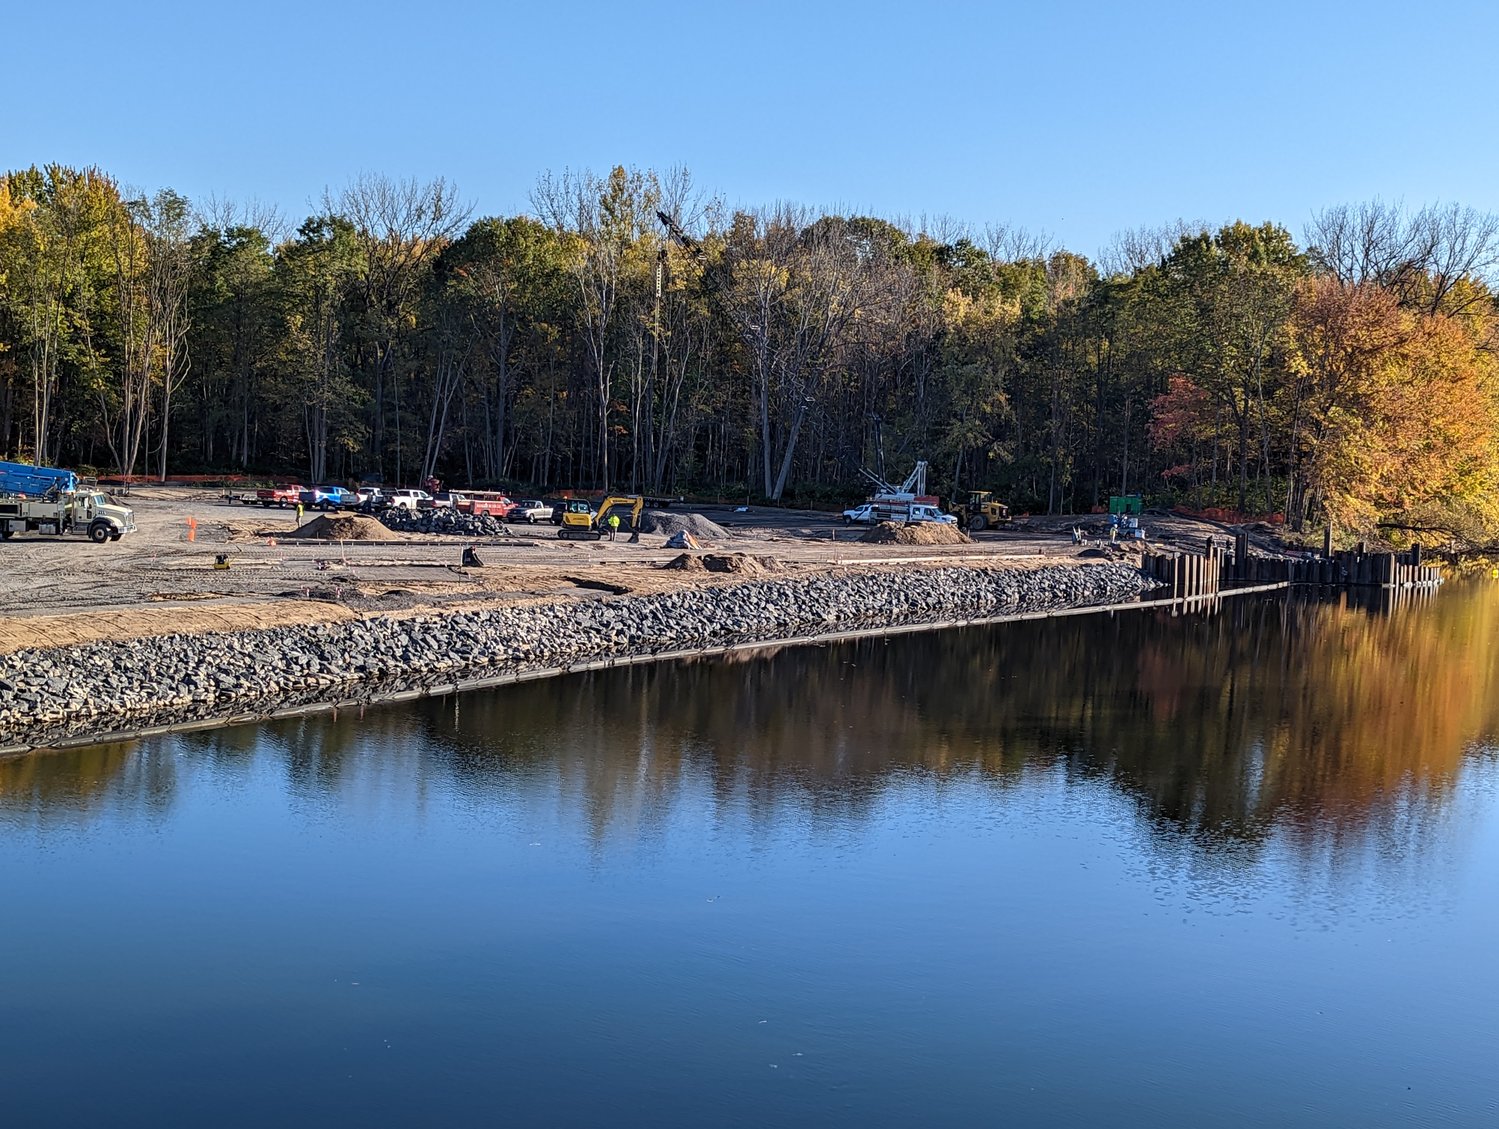 A construction crew begins work on the boat launch site on Cove Road in Verona. The project, officials say, will help to enhance fishing and boating recreational opportunities.